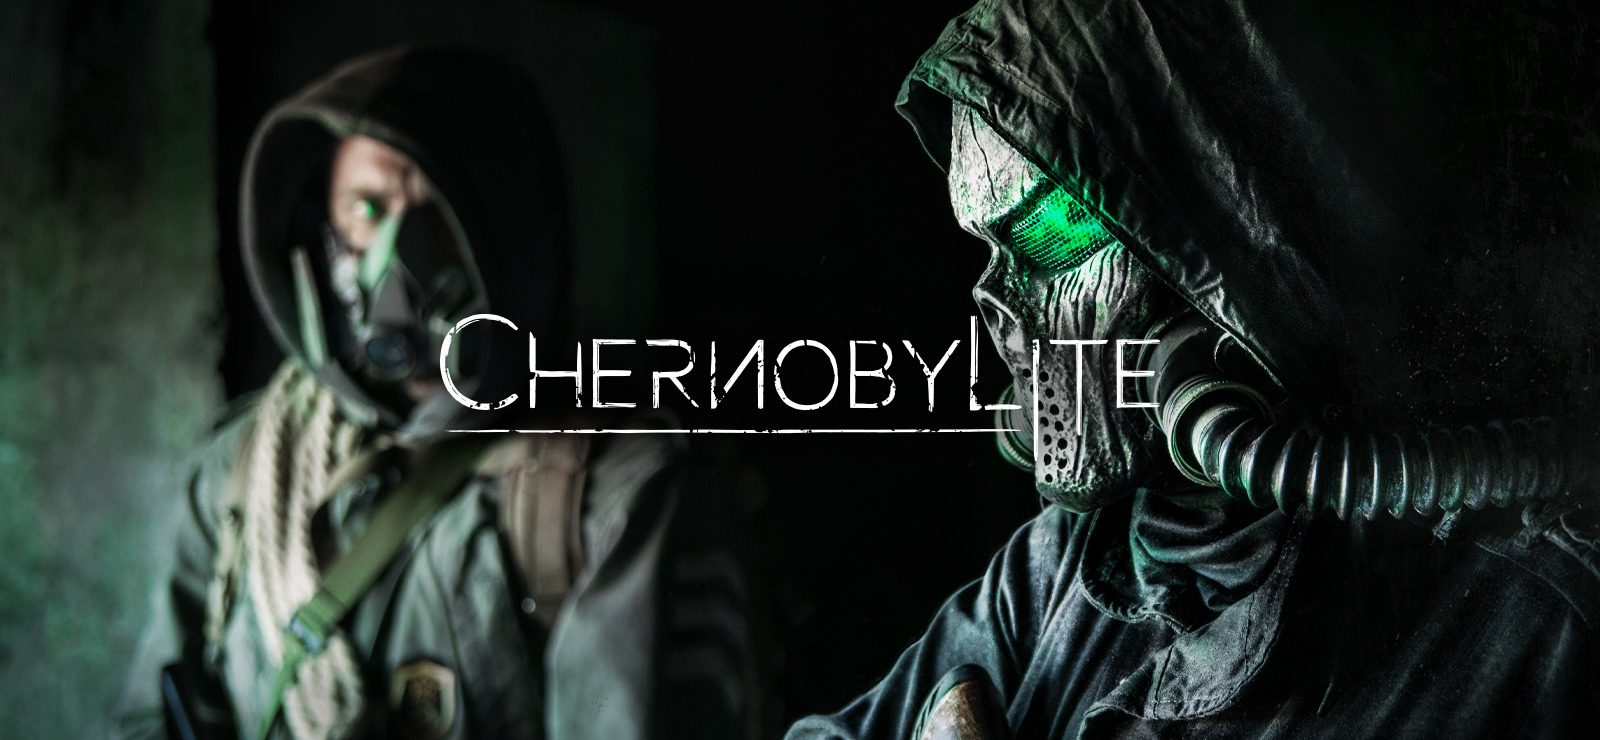 Explore Chernobyl’s Exclusion Zone In The Just Released ‘Chernobylite’